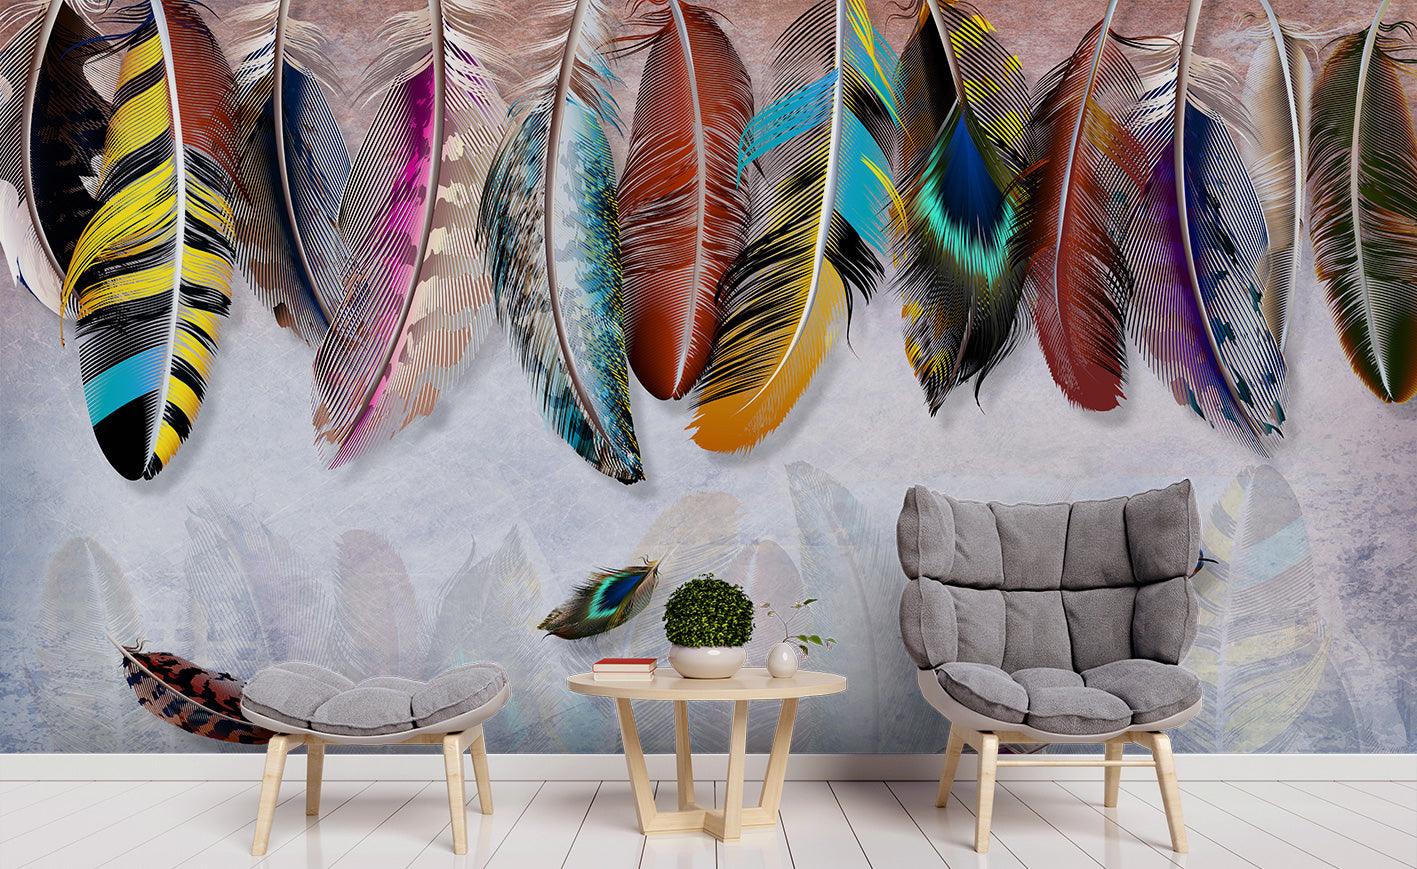 3D Colorful Feathers Wall Mural Wallpaper 26- Jess Art Decoration